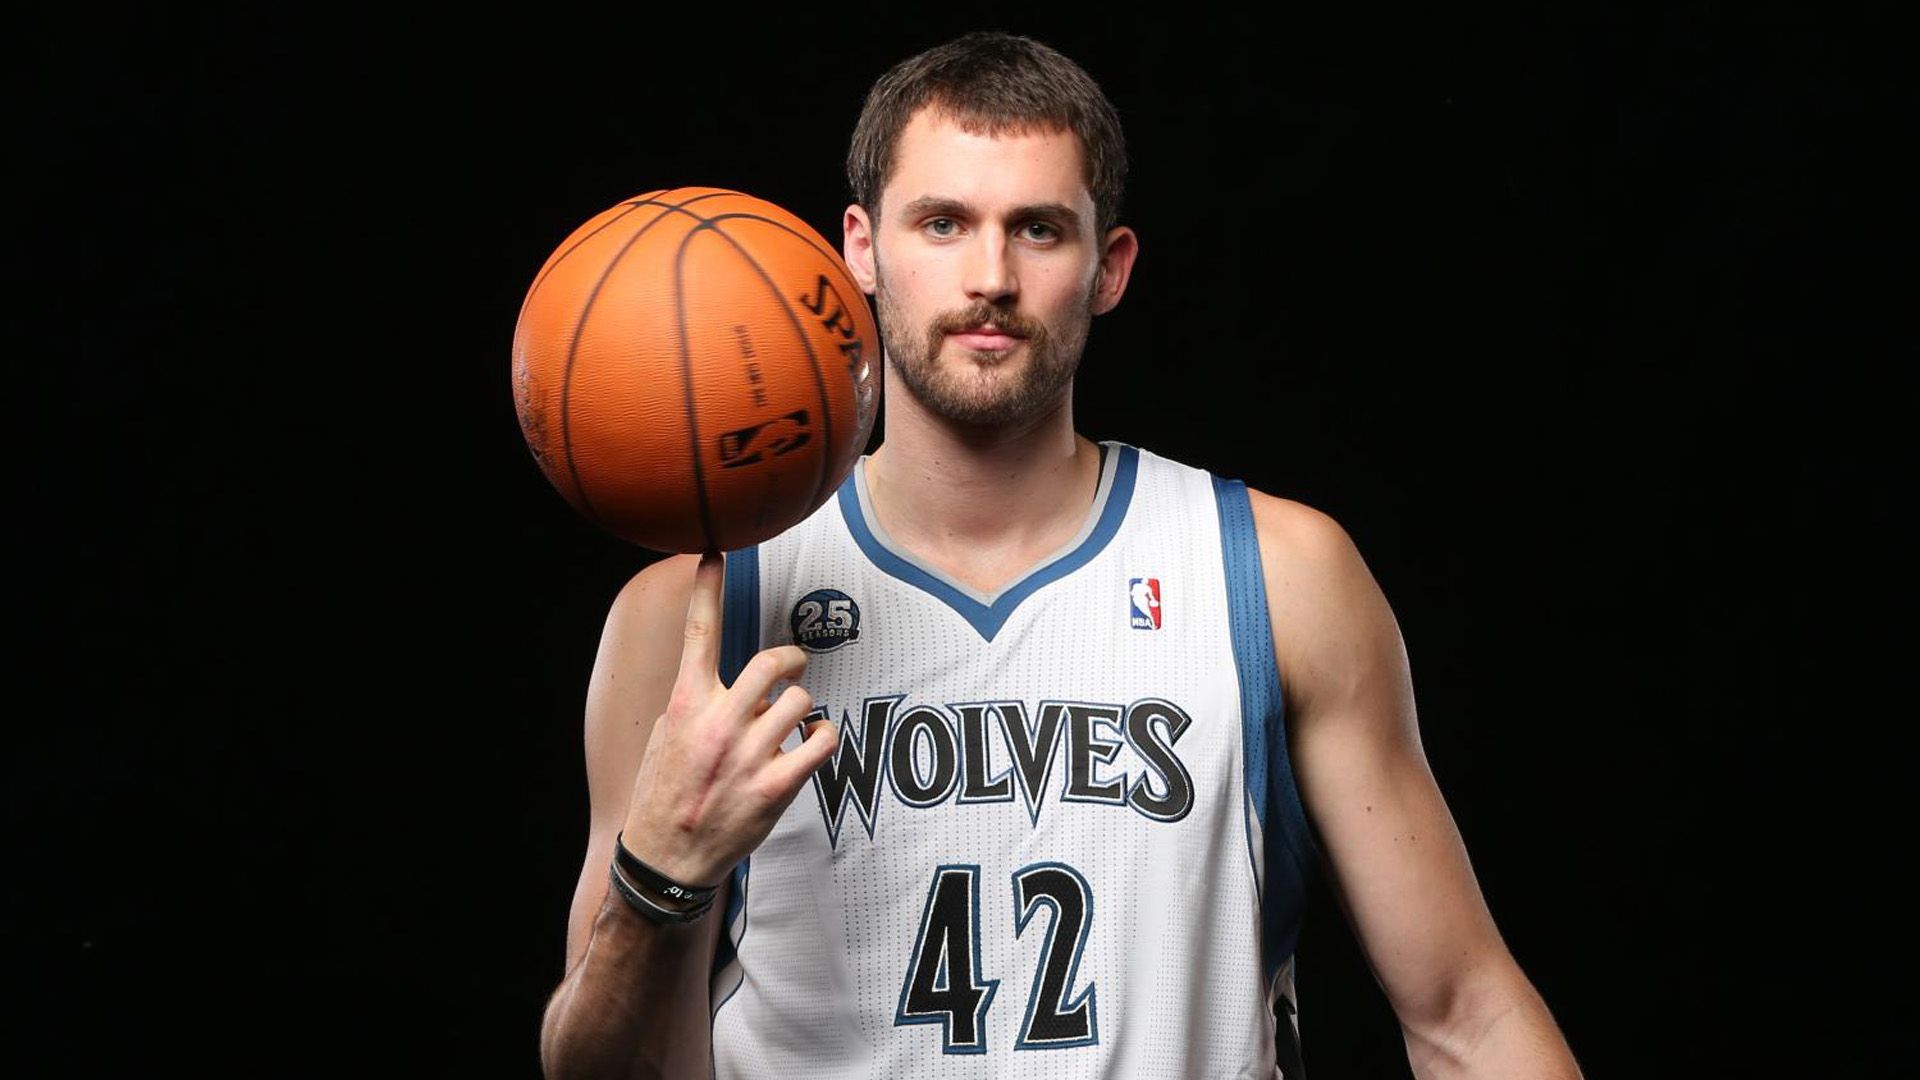 HD Kevin Love Wallpapers HdCoolWallpapers.Com